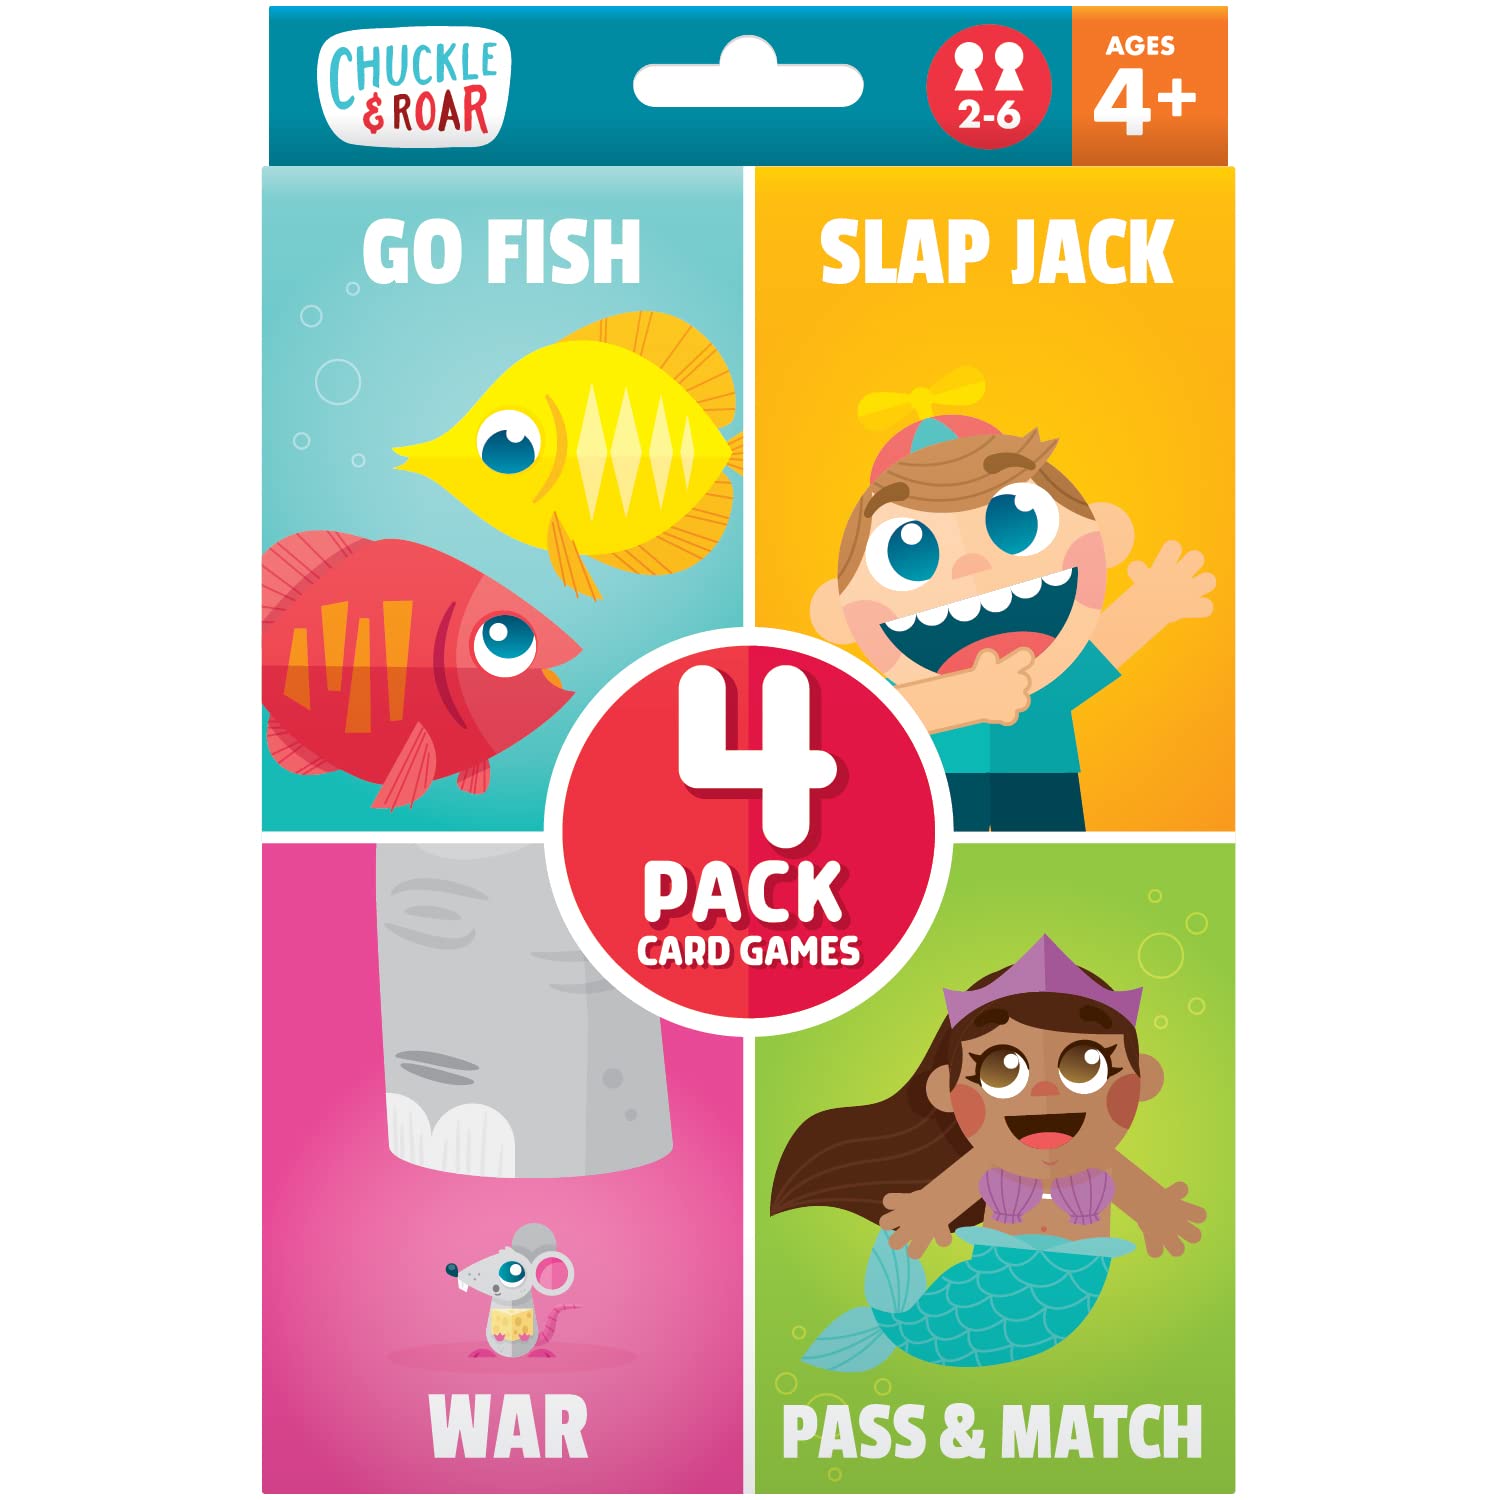 Chuckle & Roar - Classic Card Games 4pk - Ages 4 and up - Family Game Night - Go Fish, Slapjack, War, Pass and Match